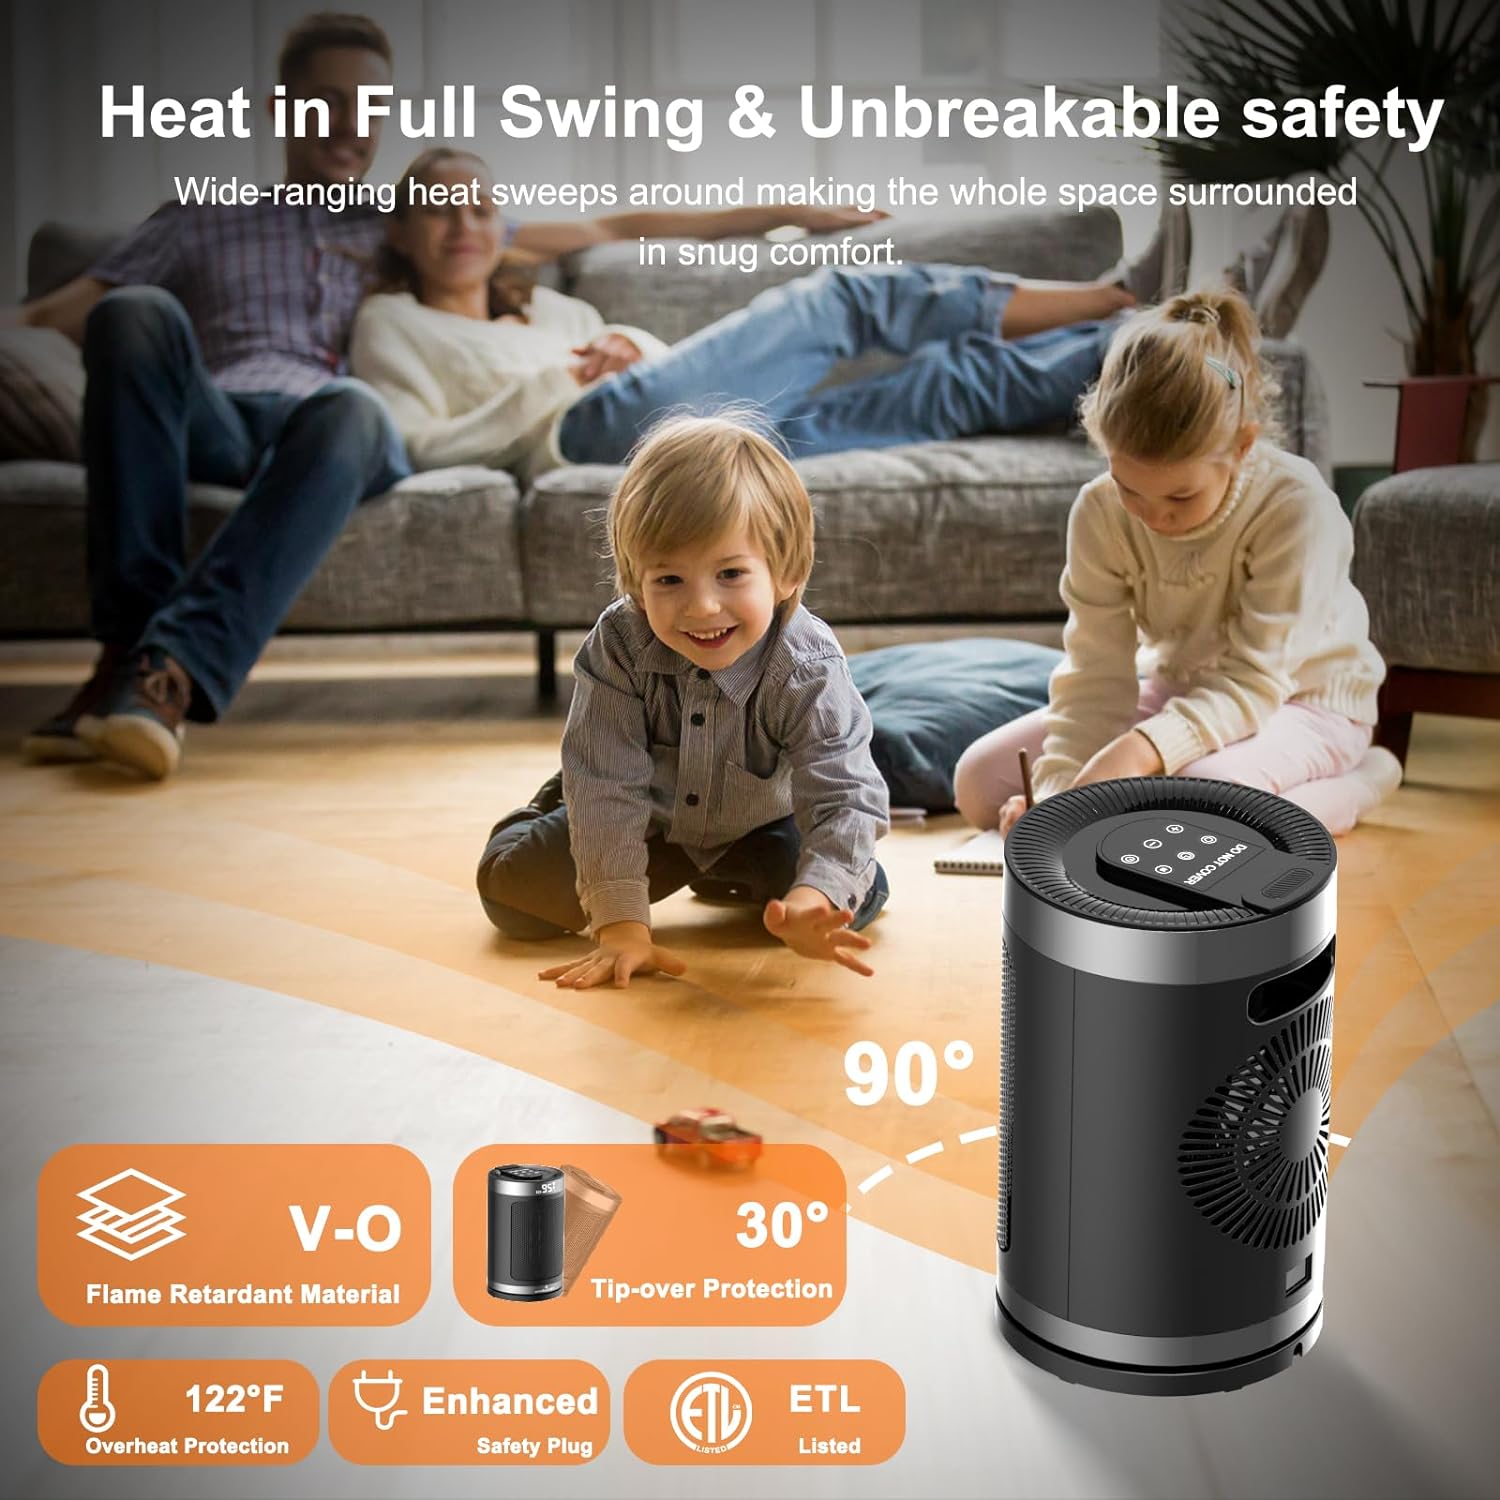 Space Heater for Indoor Use, 1500W PTC Ceramic Portable Heater with Thermostat Remote, 12h Timer, 90° Oscillation, Fast Safety Quiet Electric Heater for Office Home Bedroom : Home Kitchen